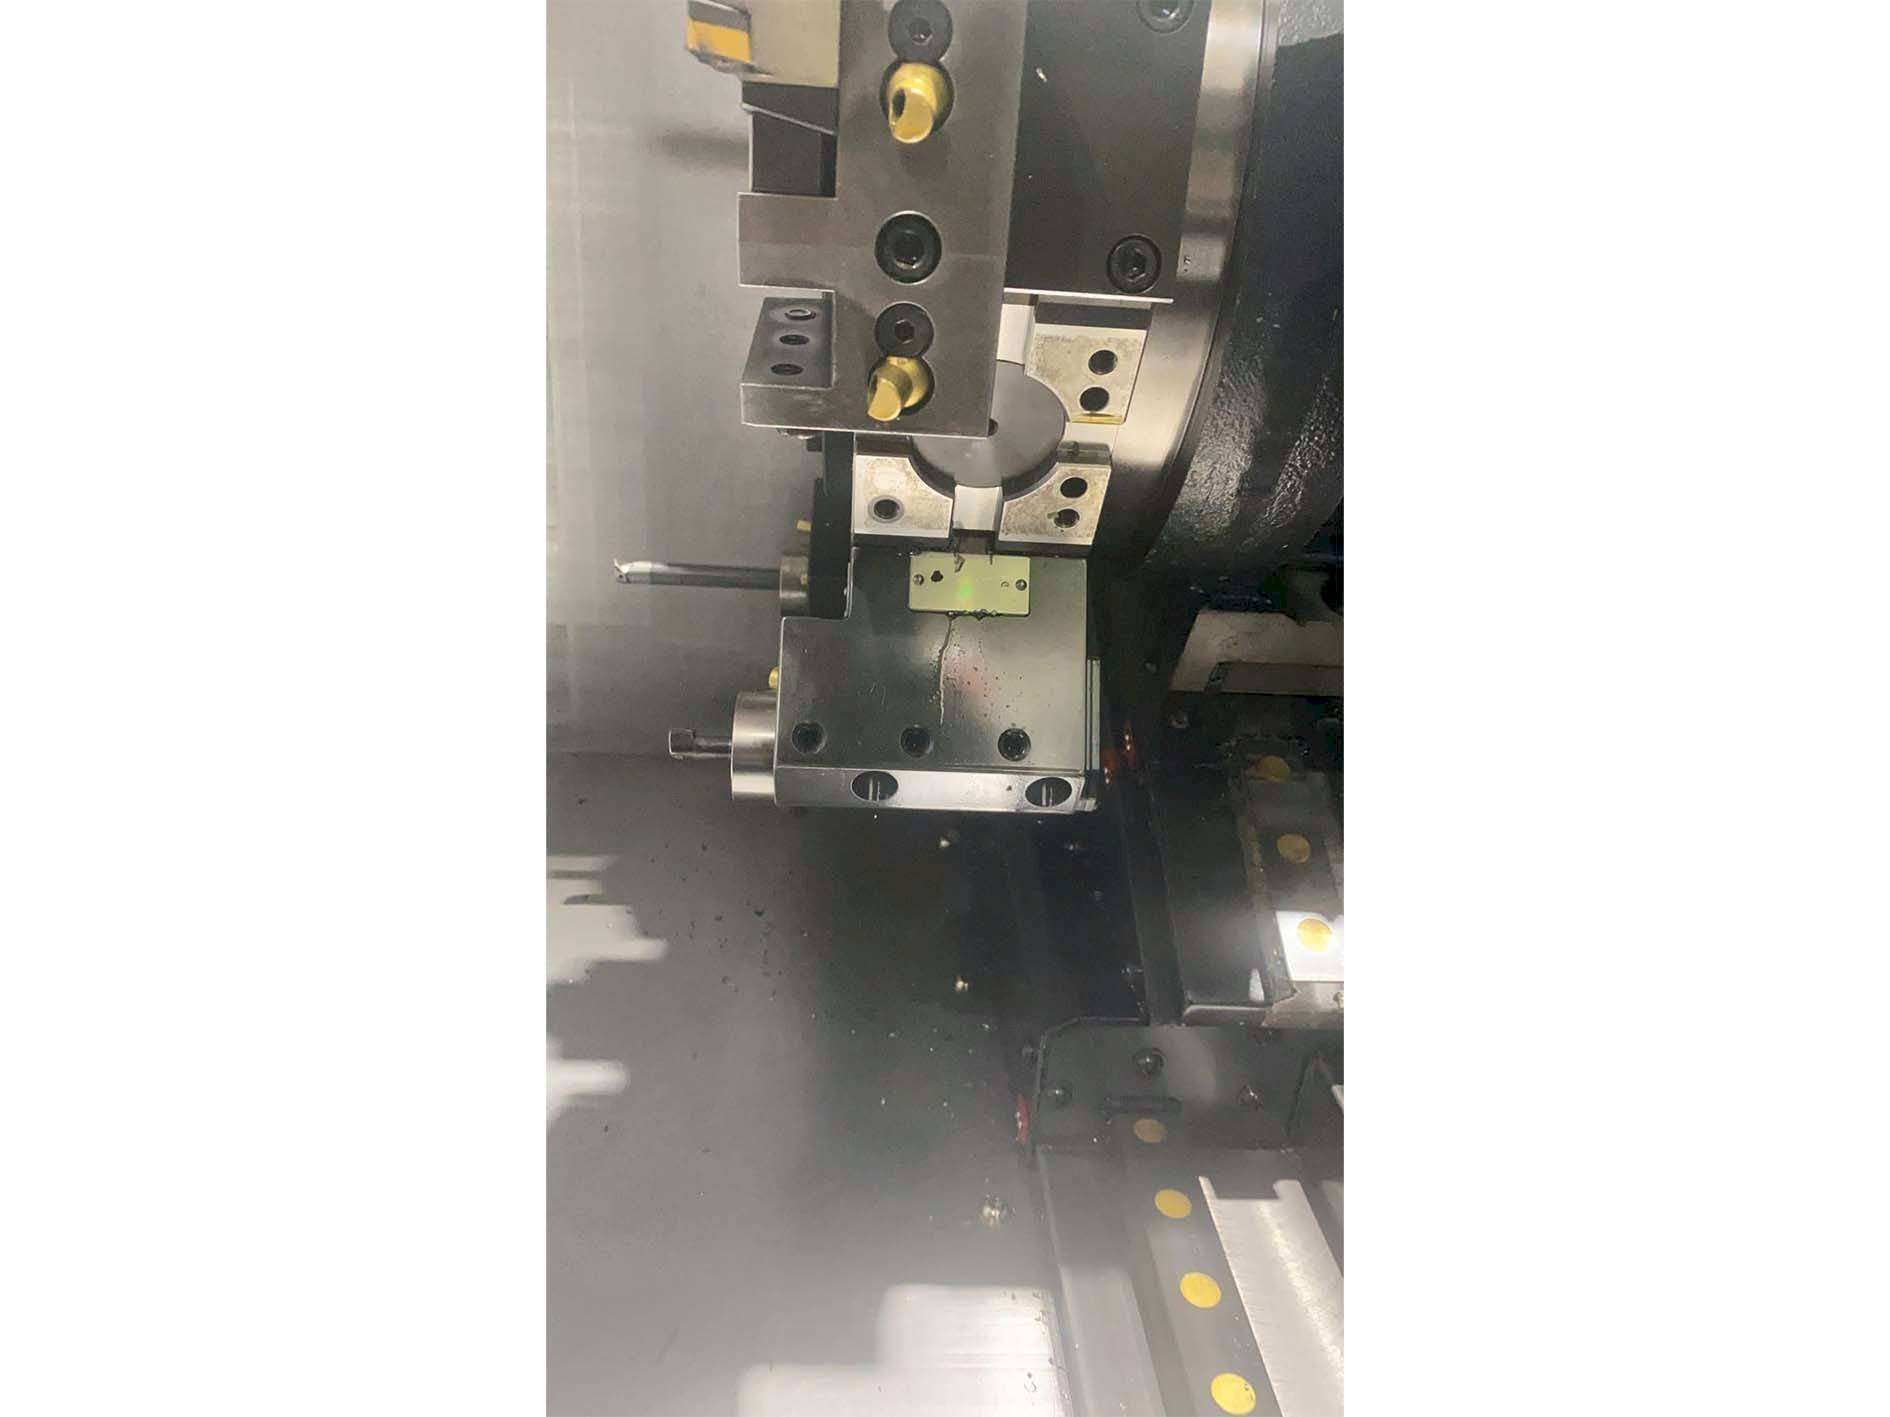 CNC Turning and Milling Machine  Doosan Lynx series 2100 LSYB photo on Industry-Pilot